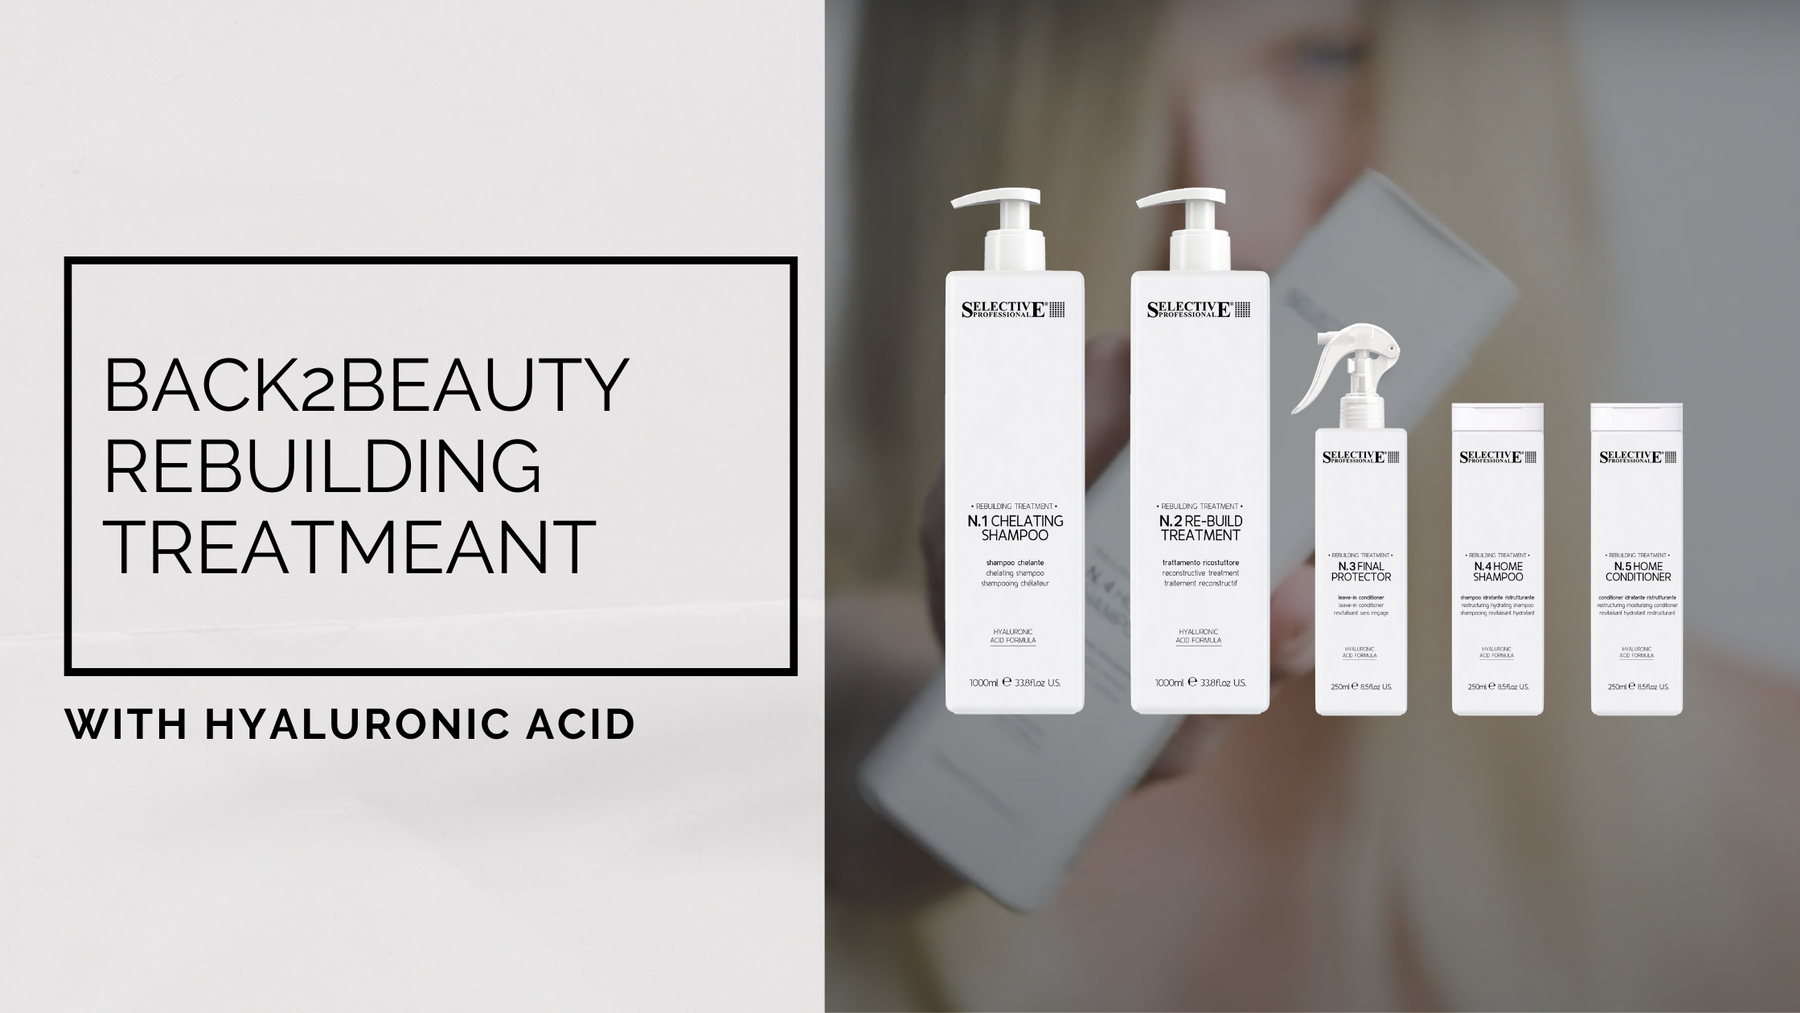 Back2beauty - Discover the new hair rebuilding treatment